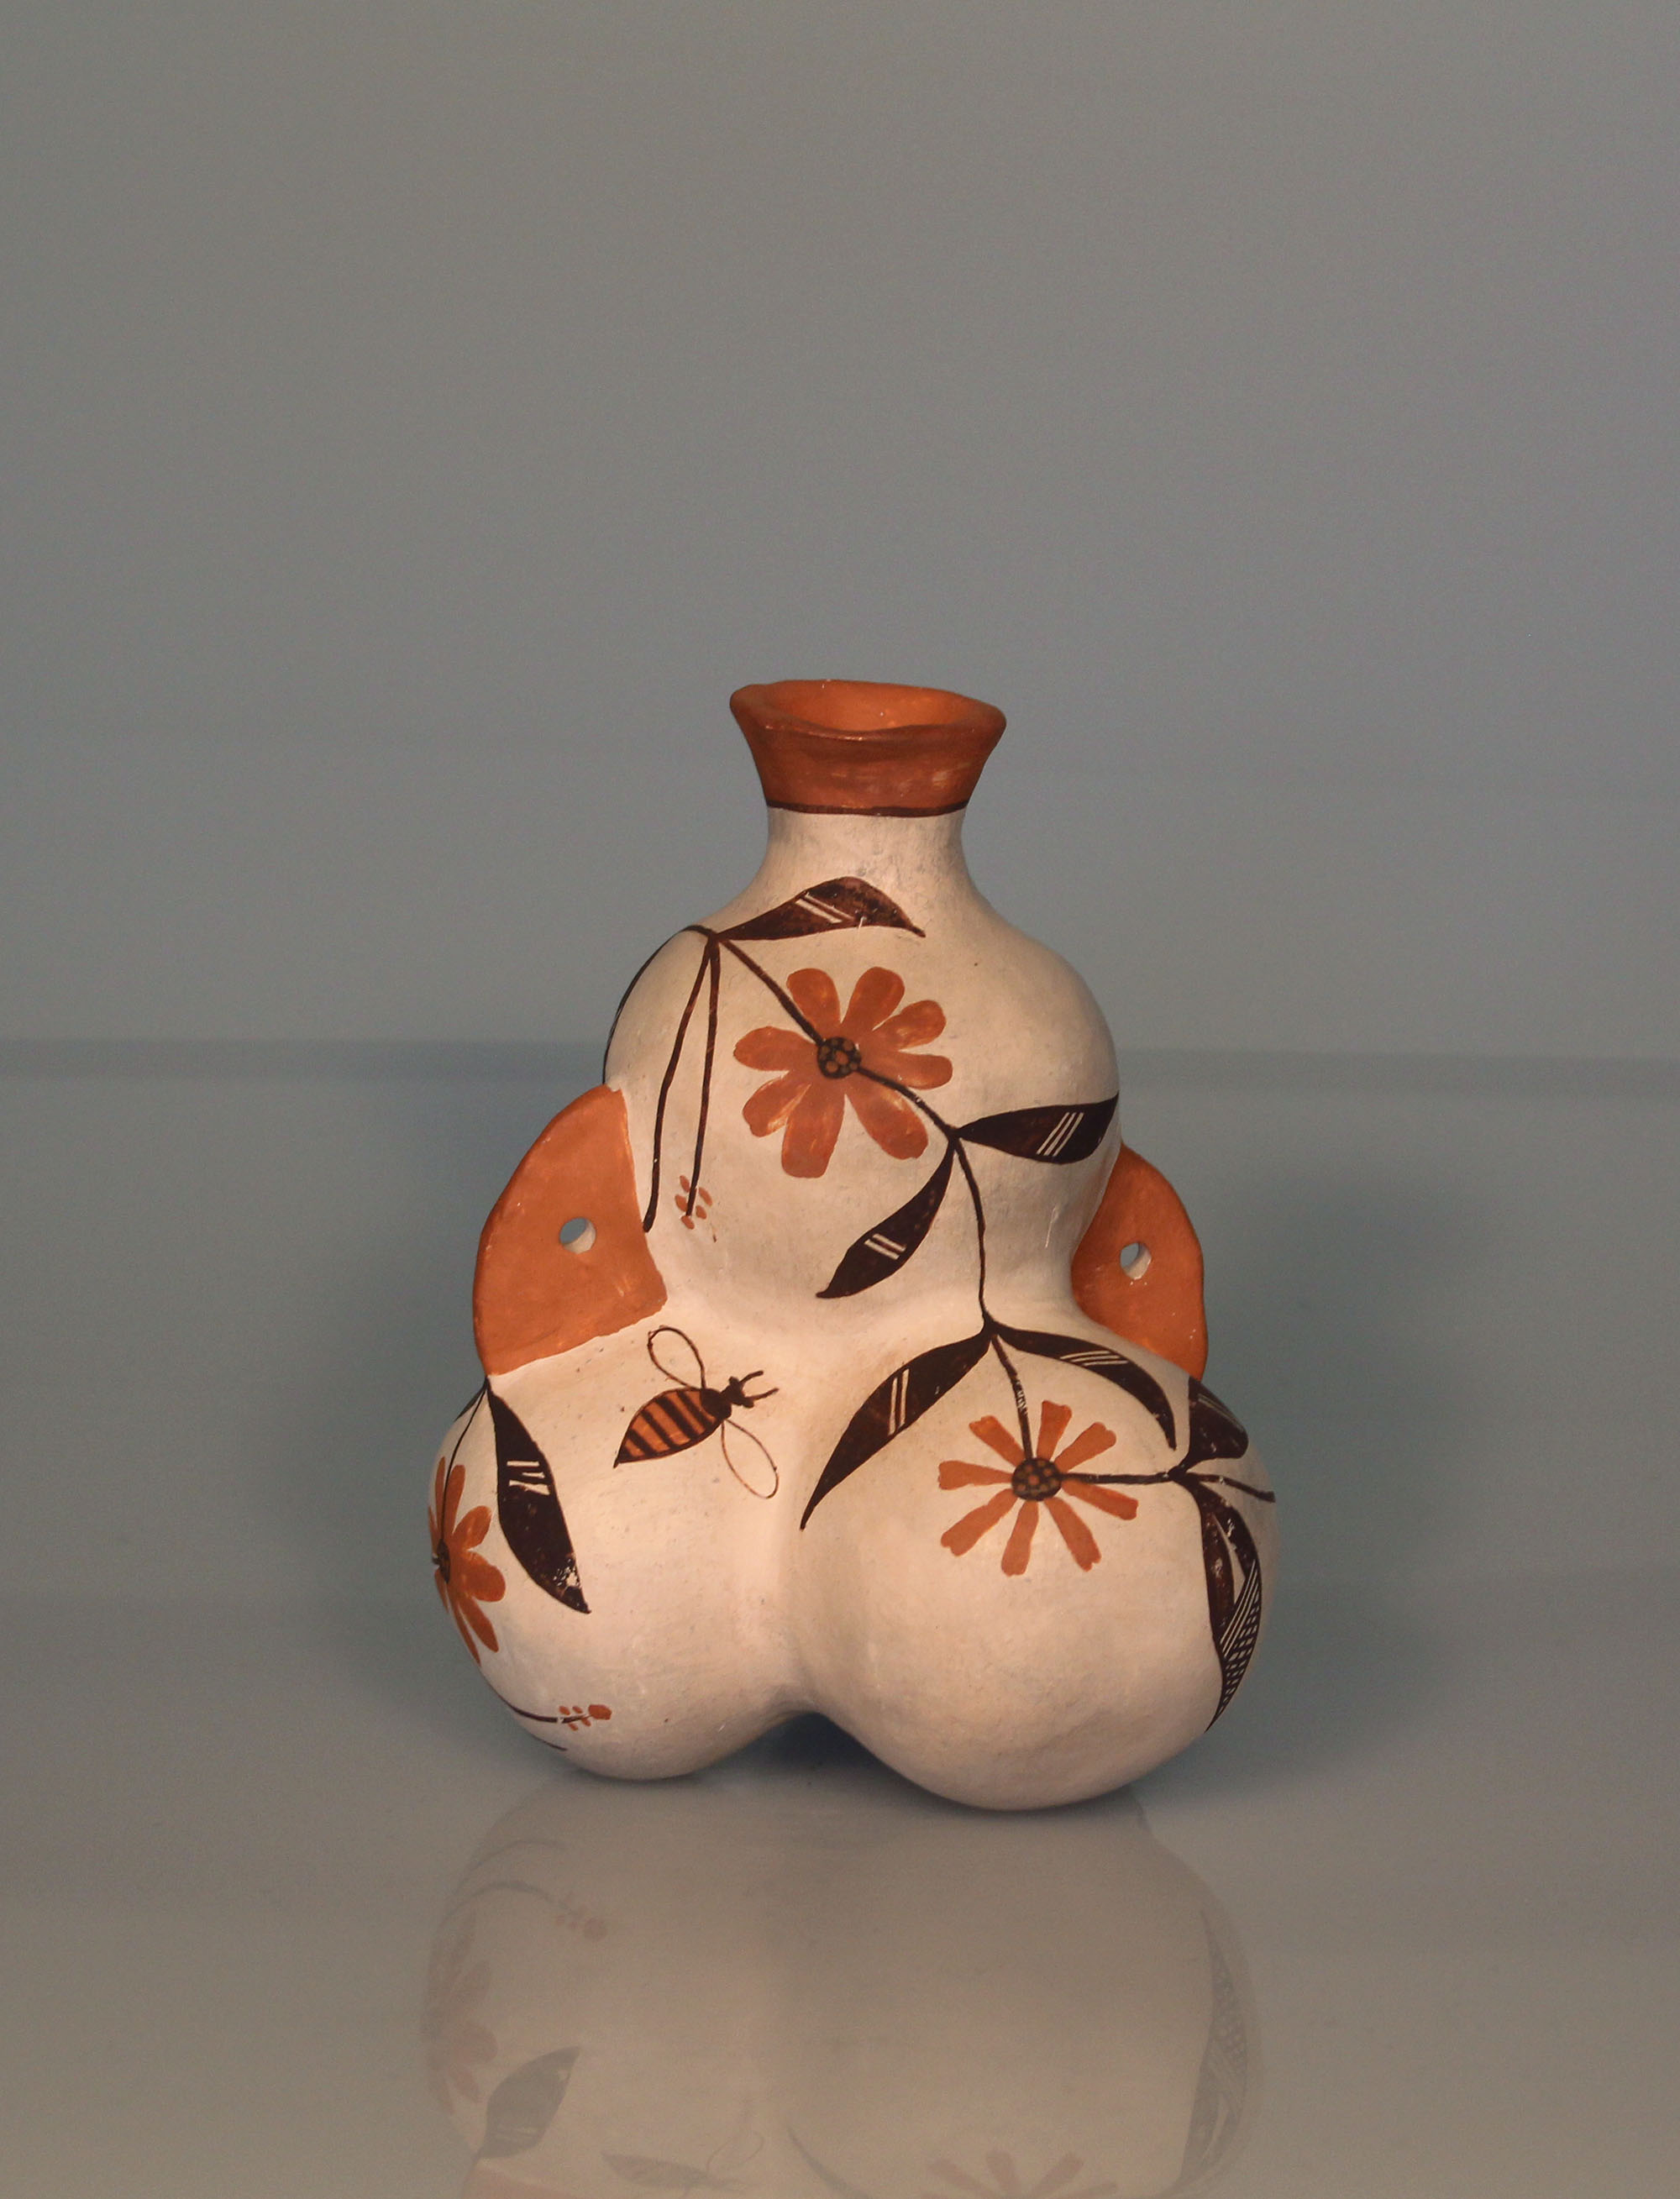 Vase by Drew Lewis, Lucy Lewis' son.